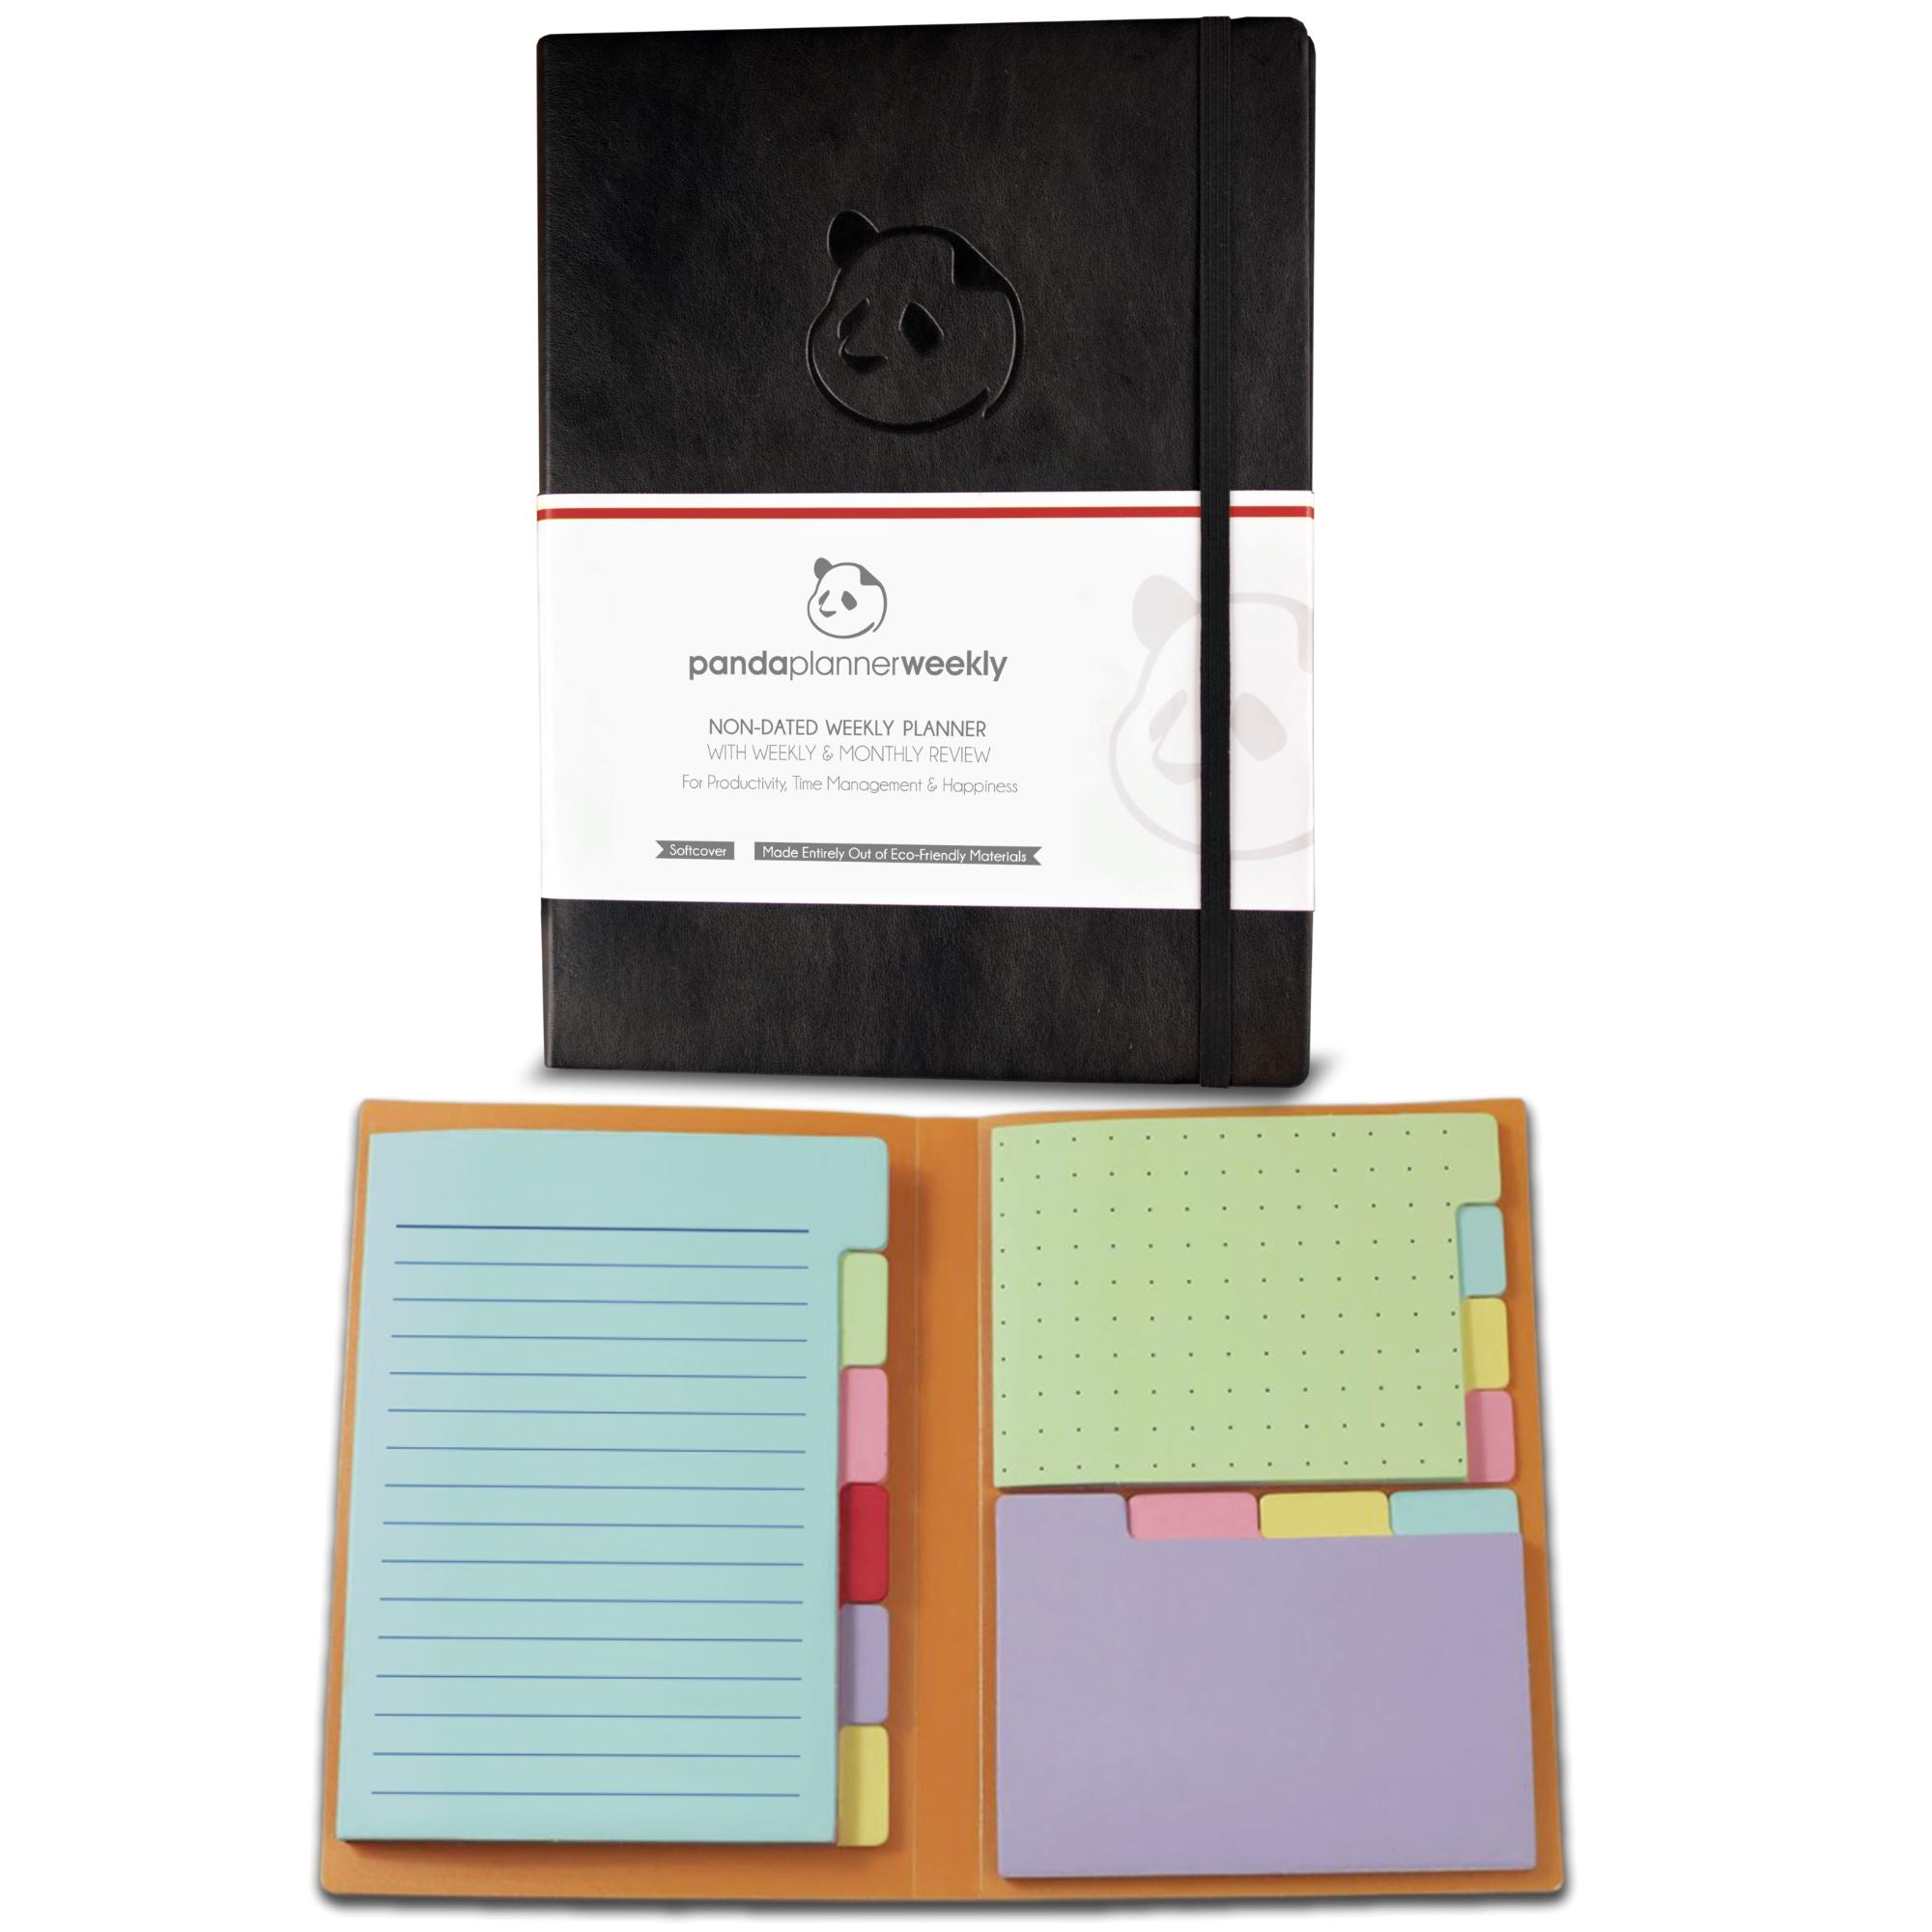 12 Month Weekly Planner – See Your Weekly Meetings at a Glance & Sticky Notes Organization Bundle Panda Planner Black Weekly Planner + Spring Sticky Notes 